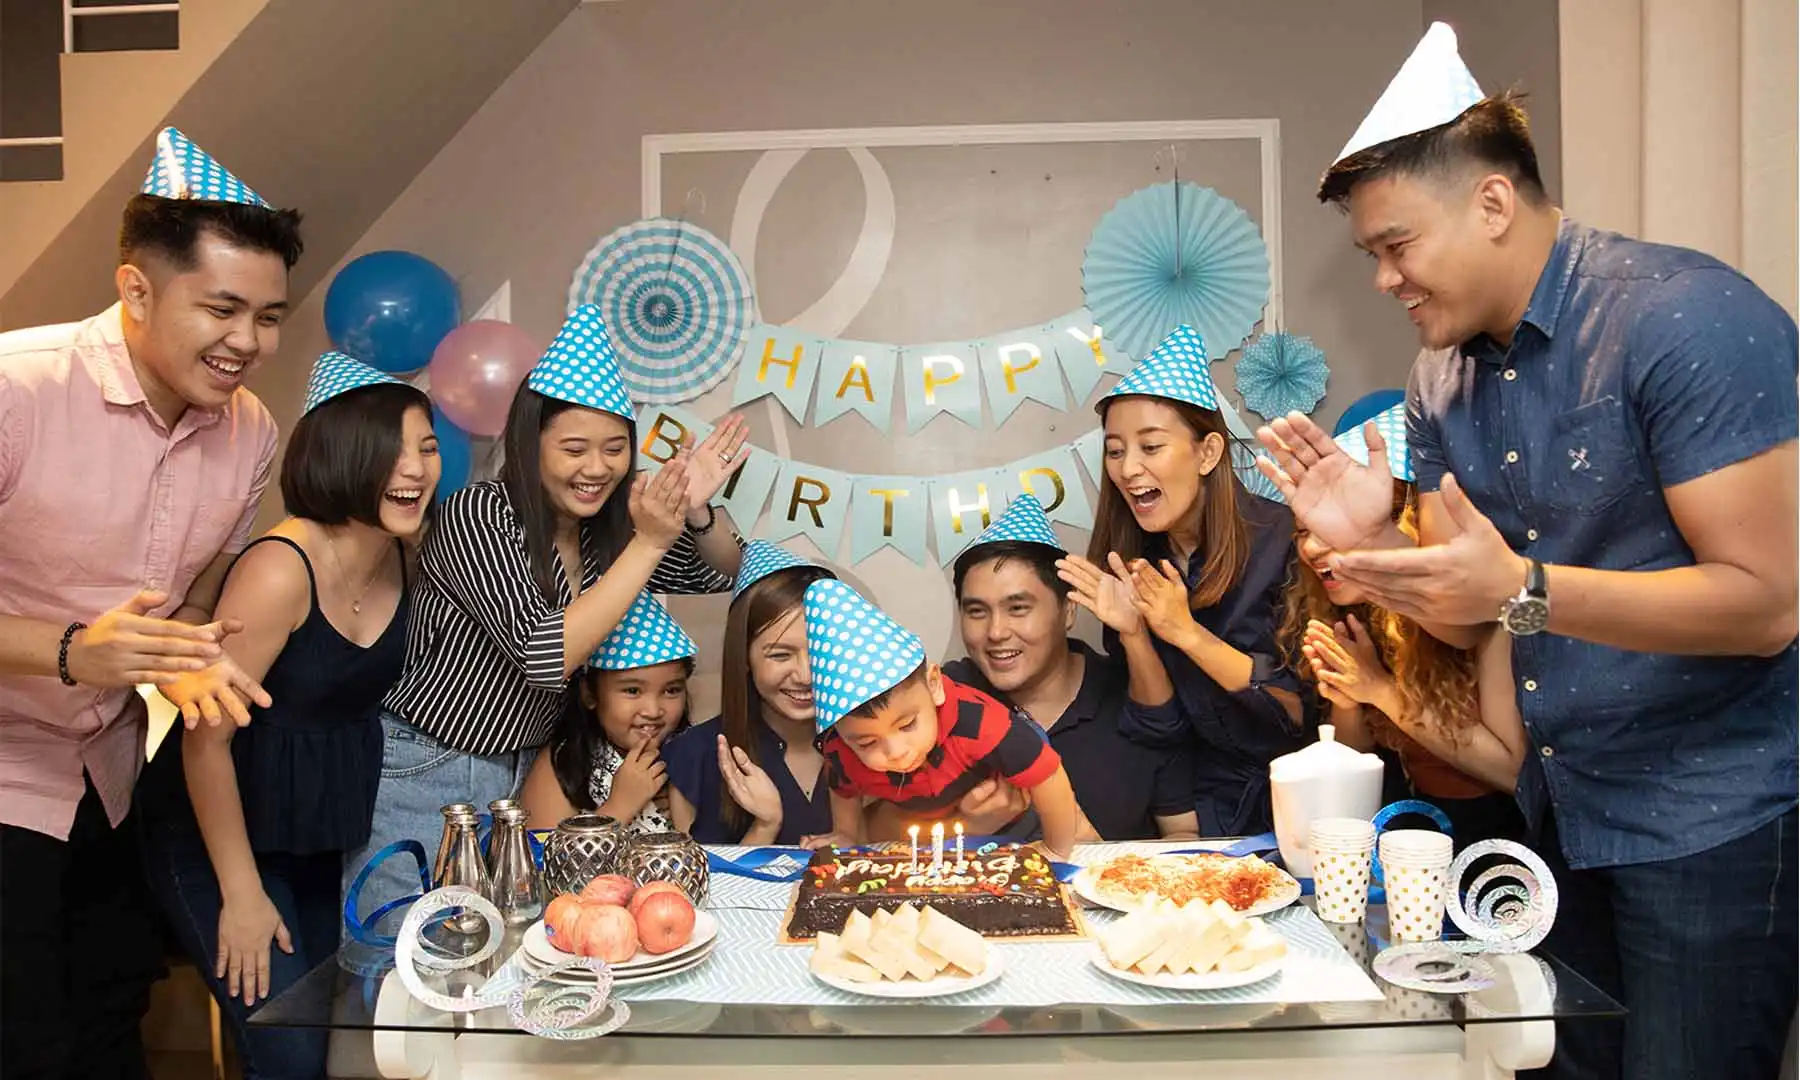 Celebrate Birthday at Home with Family 5 Simple Ideas and Themes